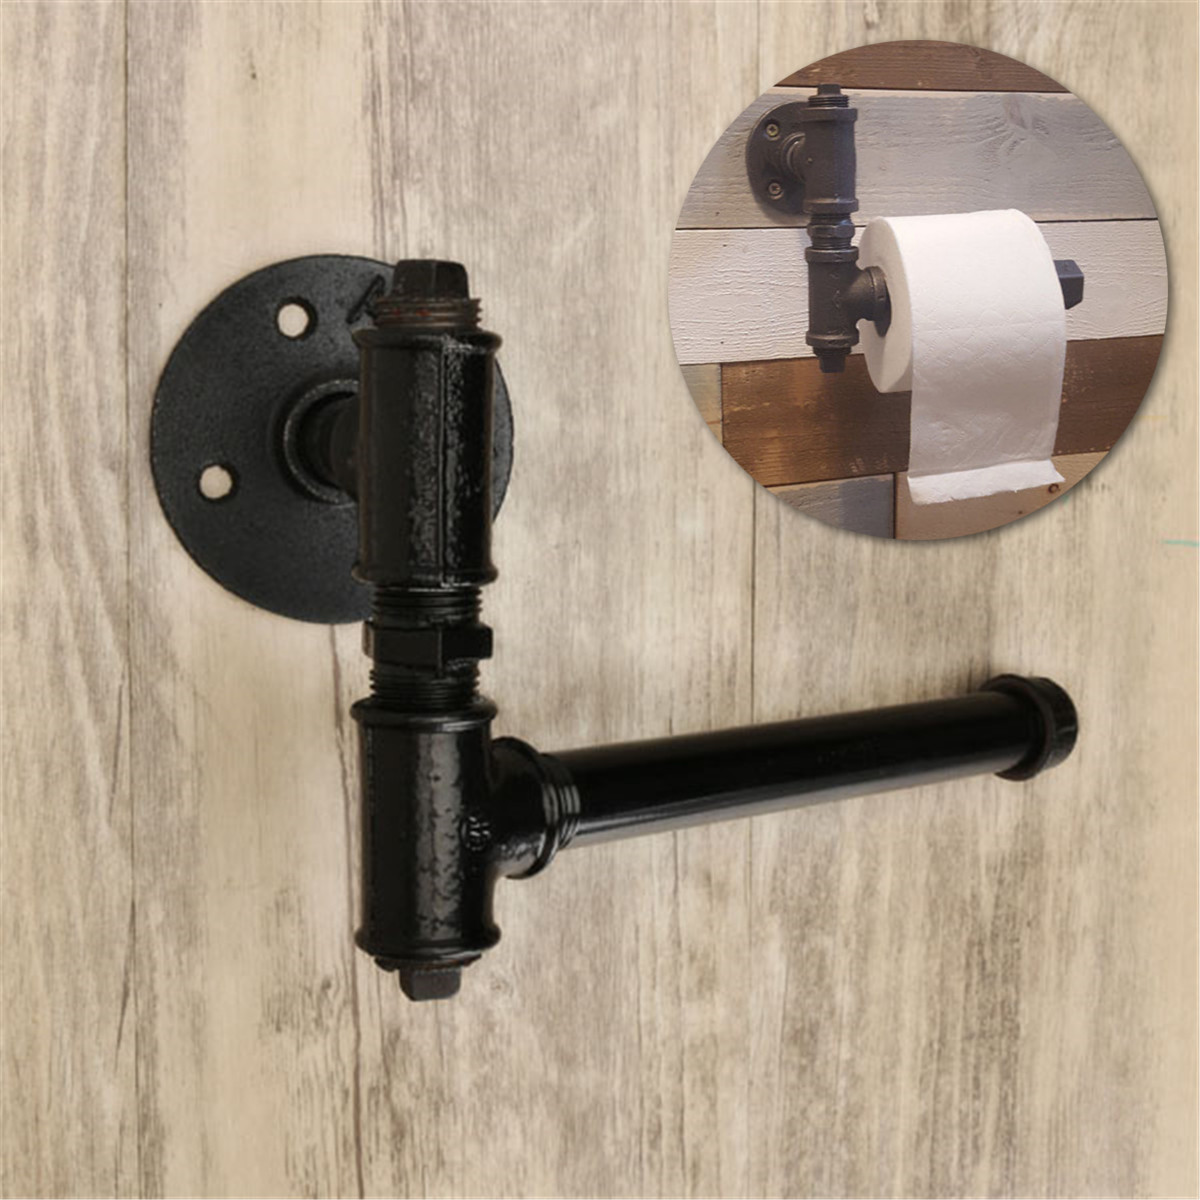 210mm-Industrial-Retro-Iron-Pipe-Tissue-Paper-Roll-Holder-Toliet-Wall-Mount-Hanger-1176525-7